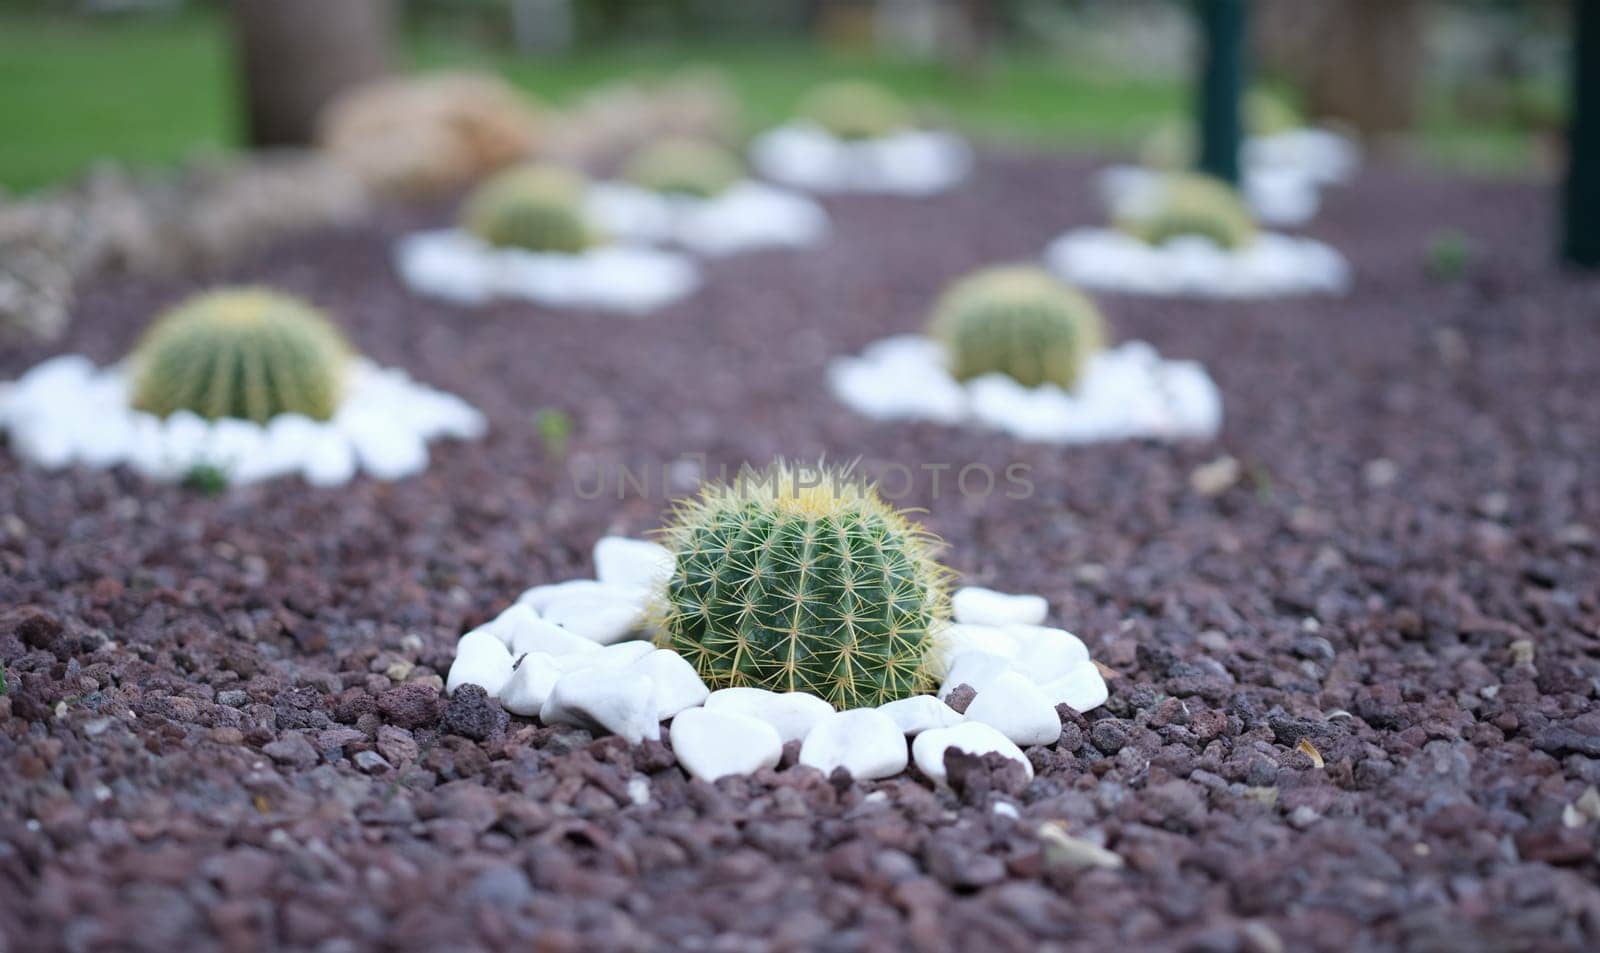 Flowerbed of cactus flowers in the garden with purple and white stones by kuprevich